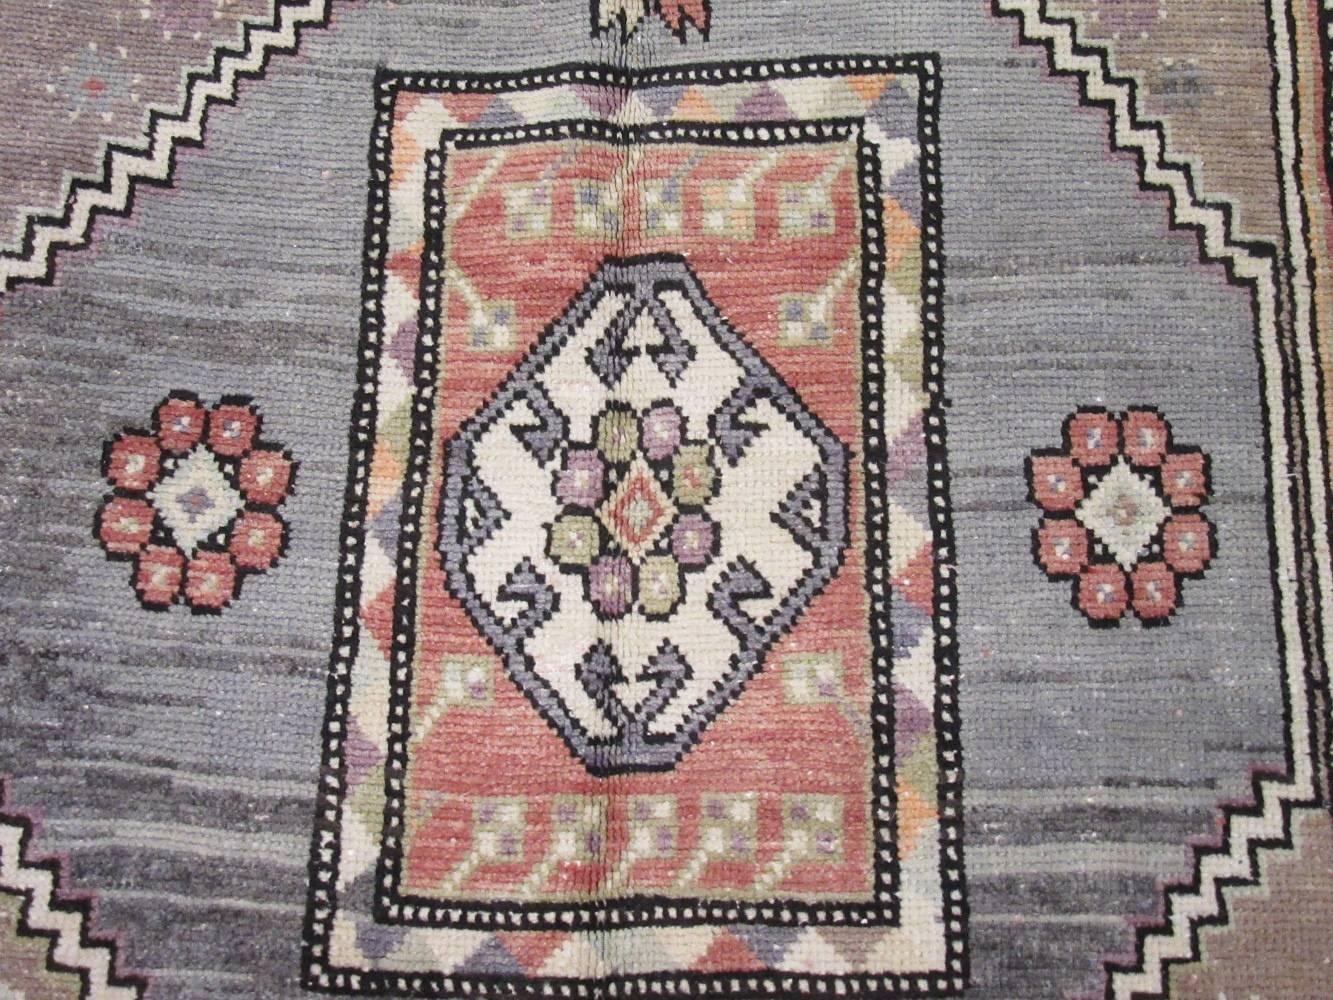 This is a vintage hand-knotted rug from the Anatolian region in Turkey. The rug has a simple nomadic design with primary colors. It is made with wool colored with natural dyes. The rug measures 5' 1'' x 8' 7'' and in great condition.